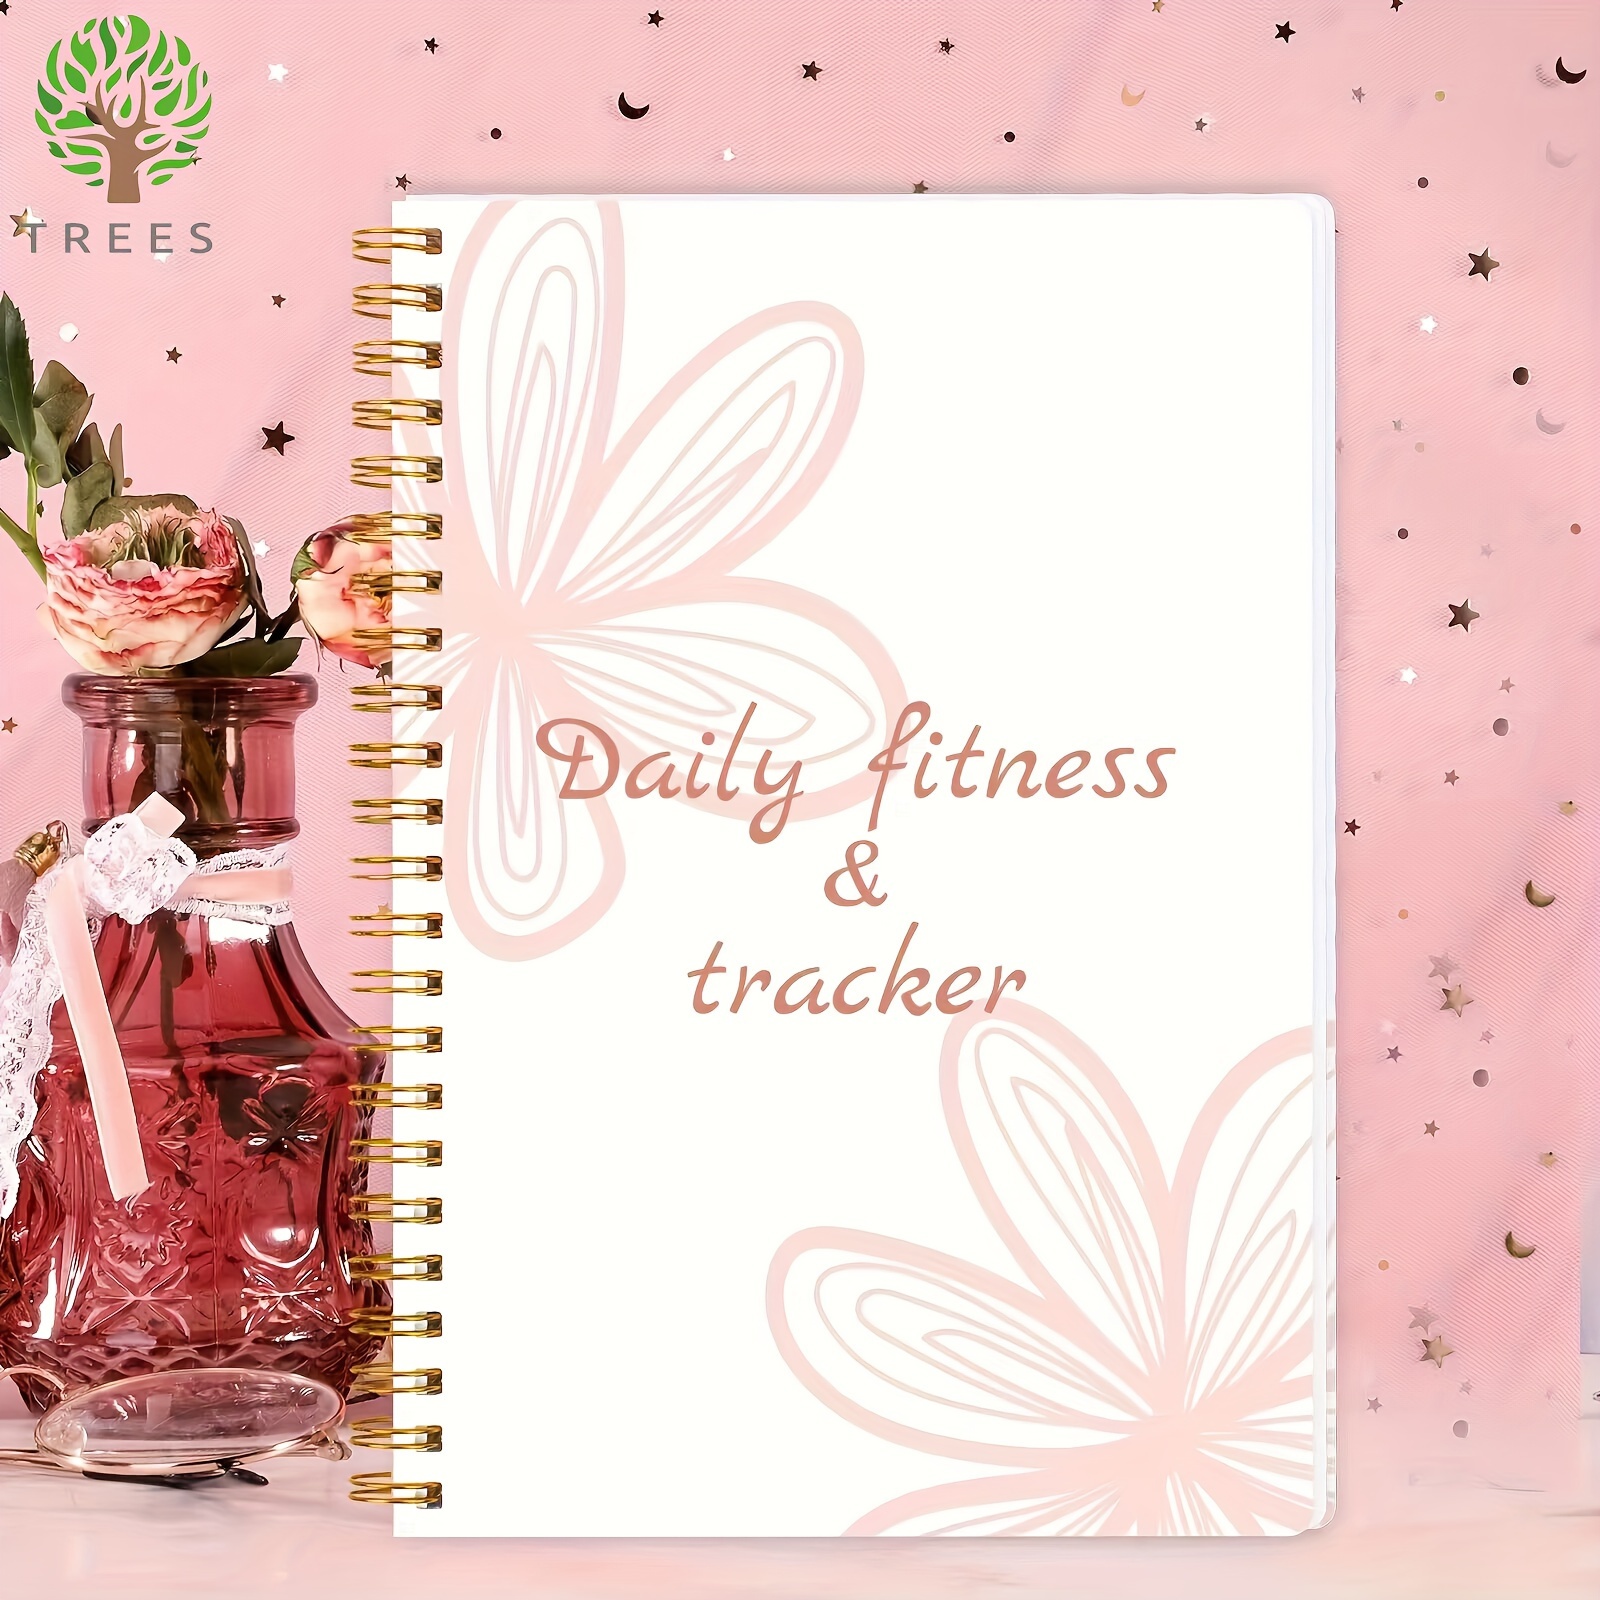 Fitness Journal Workout Log-Book Fitness Planner Daily Log Planner